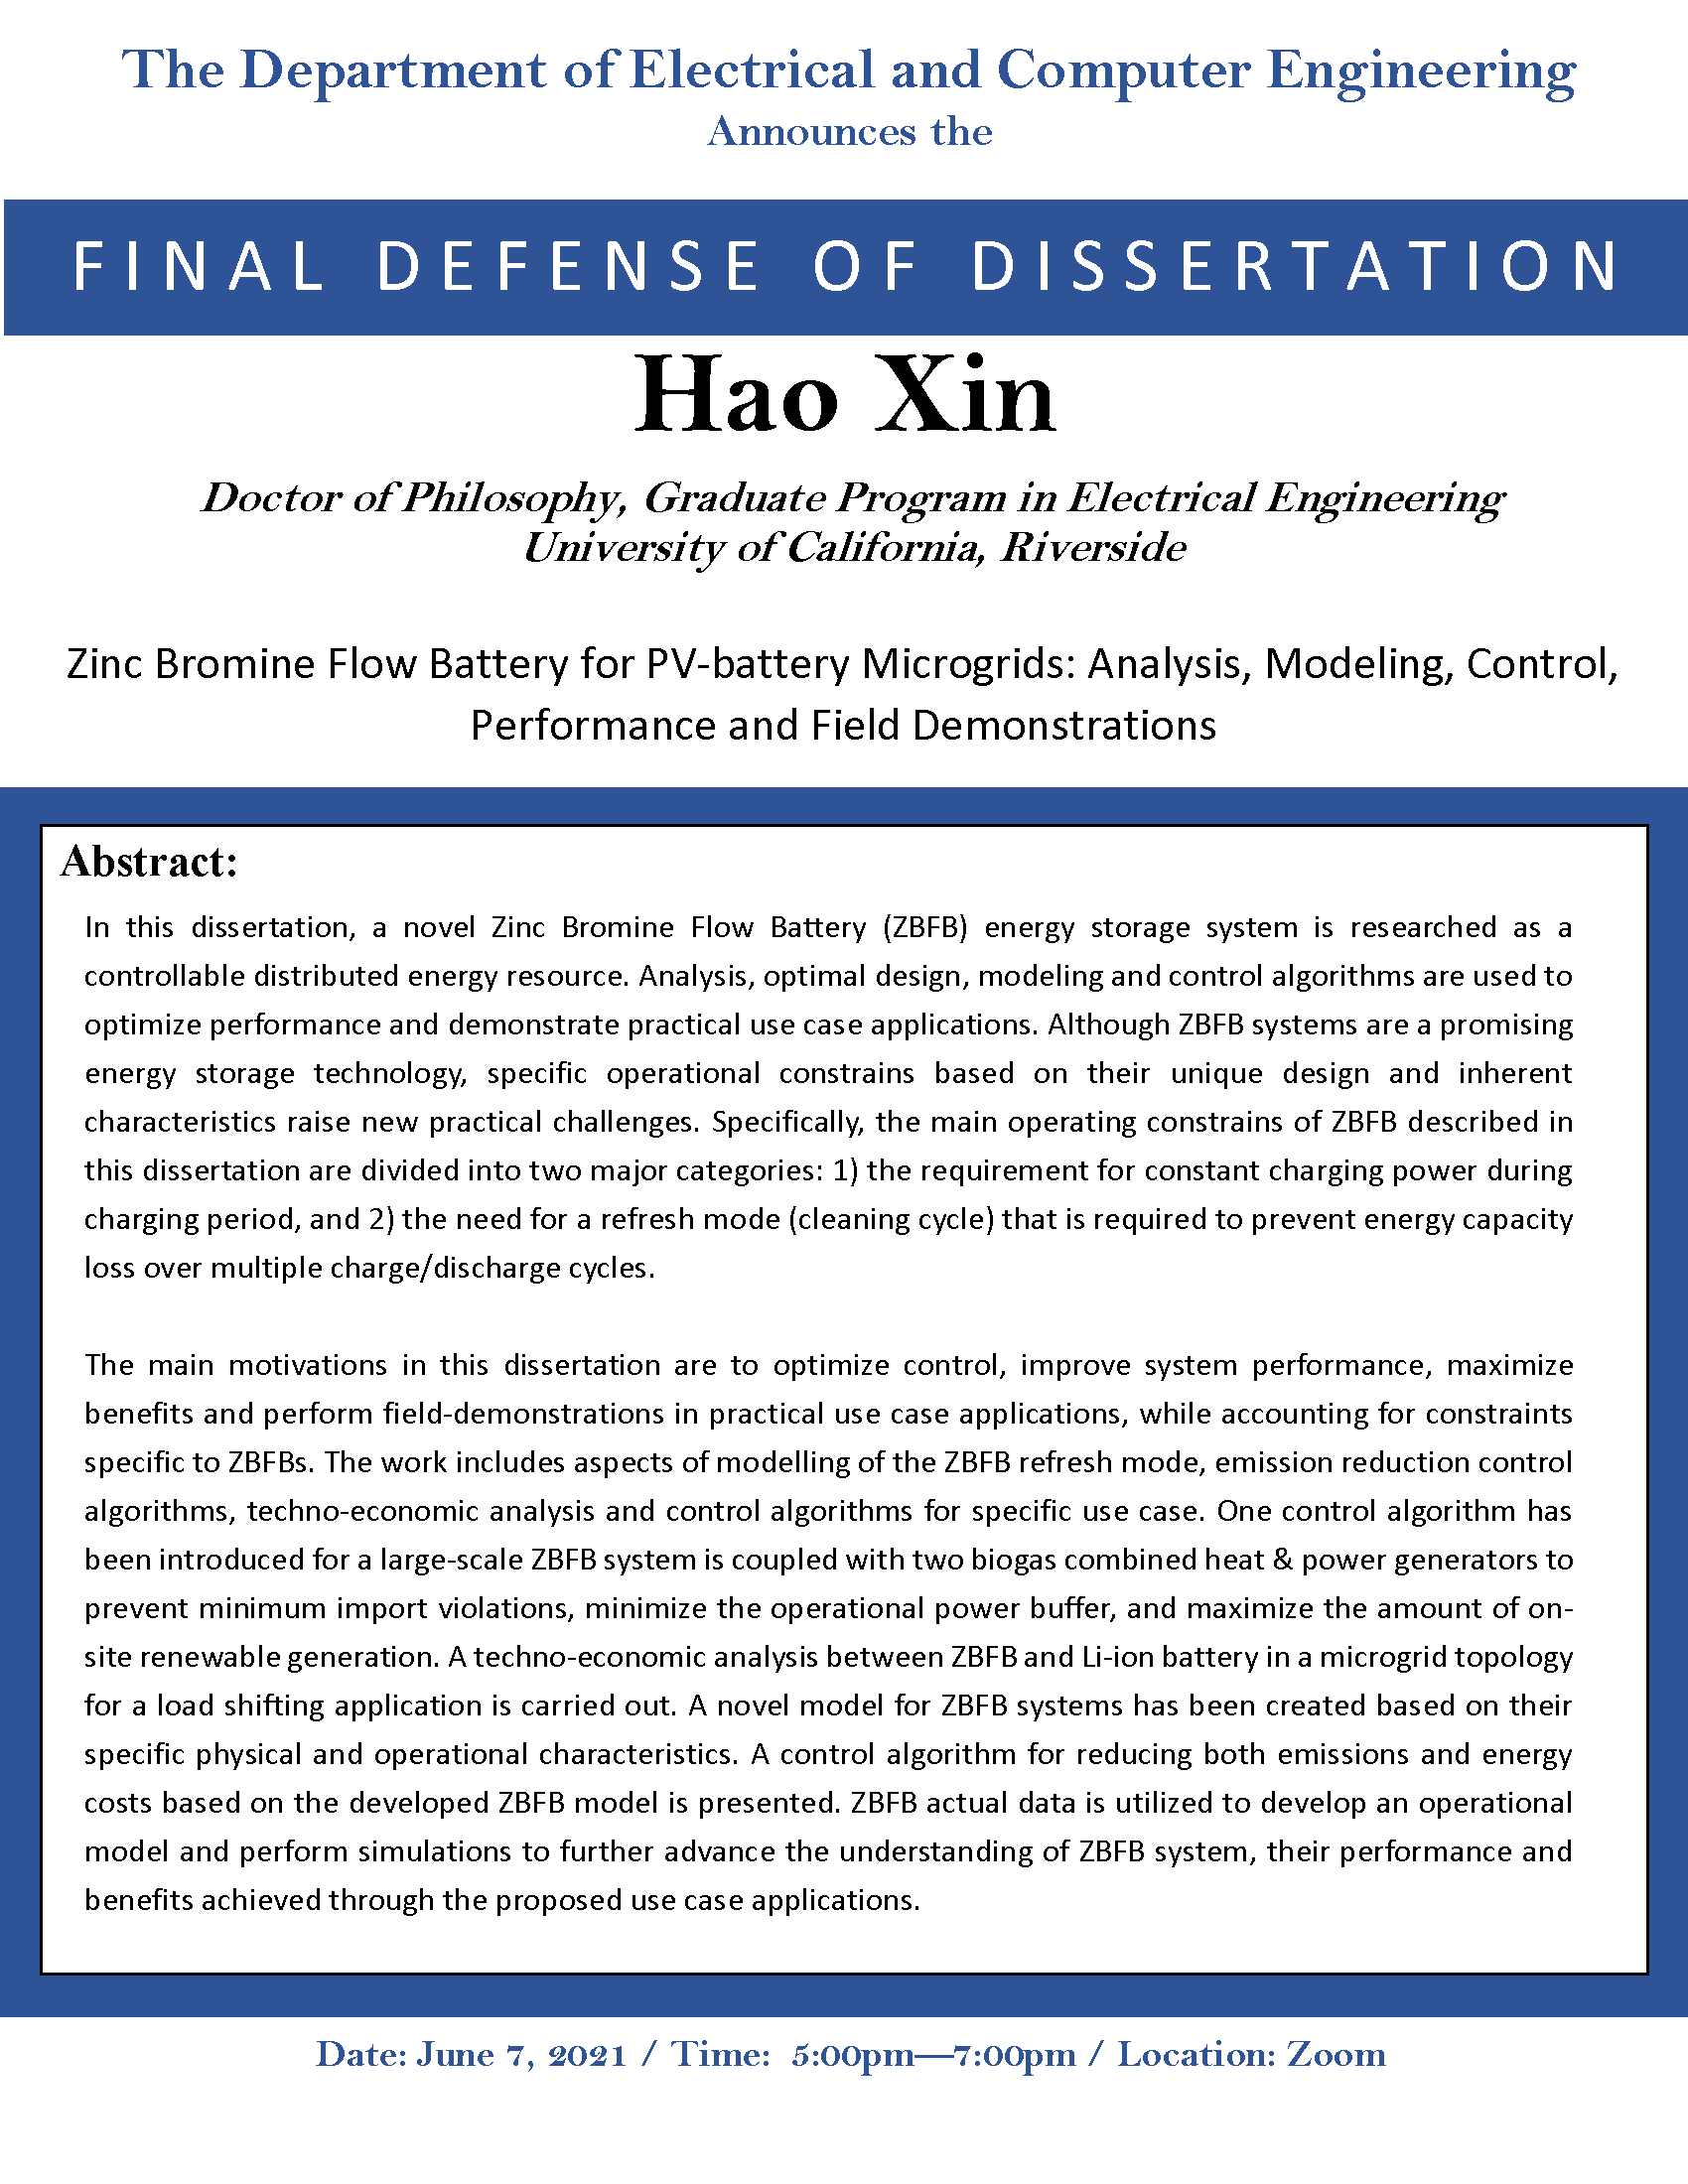 Final Defense of Dissertation: Hao Xin